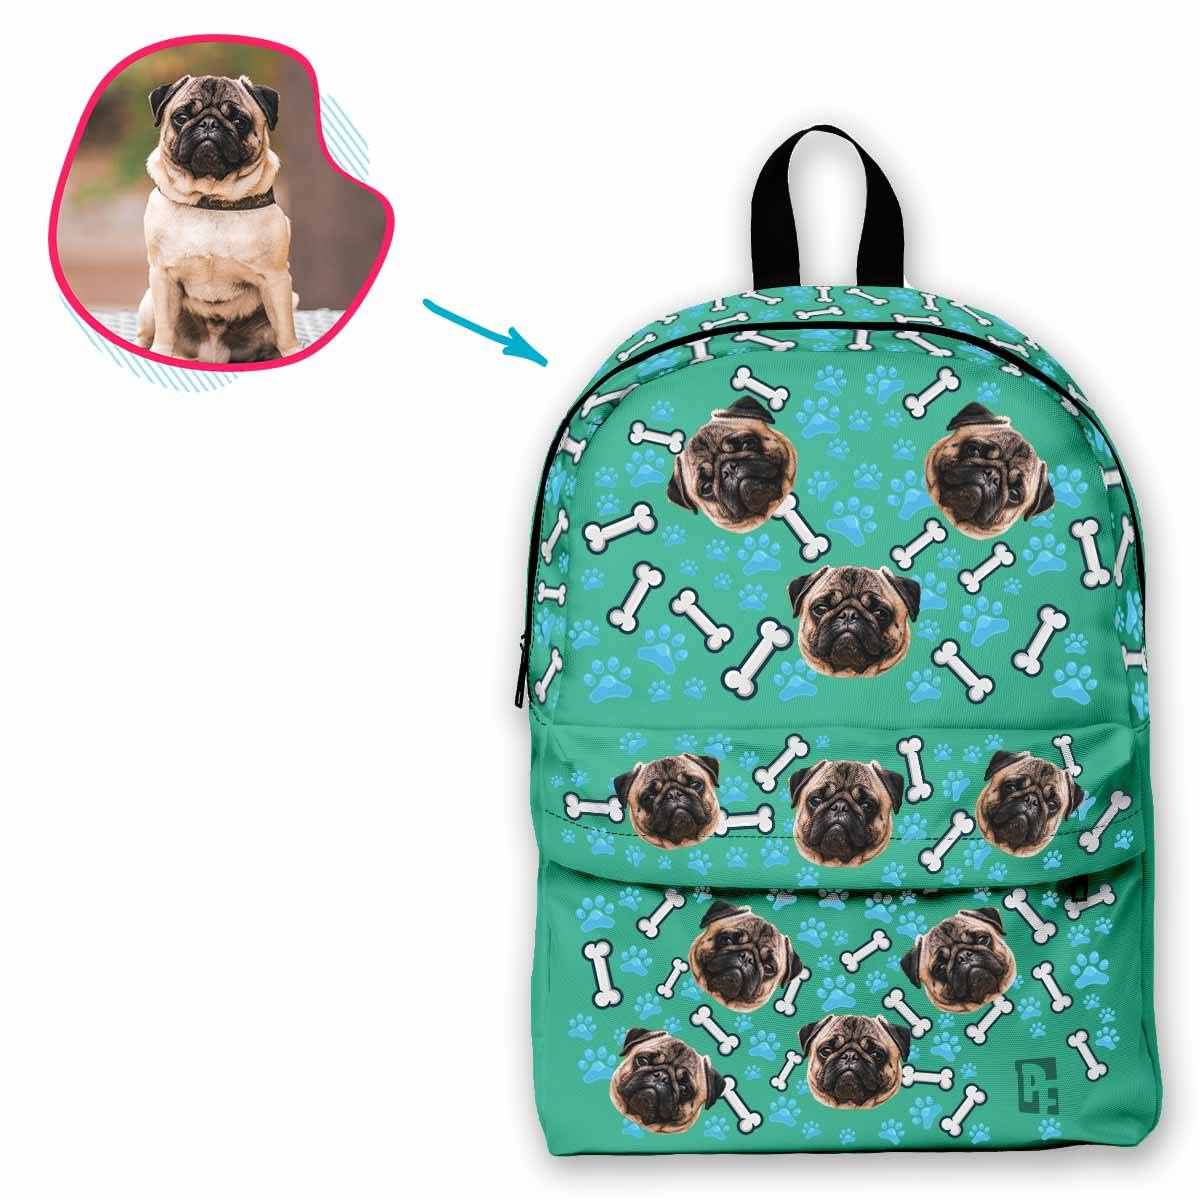 mint Dog classic backpack personalized with photo of face printed on it